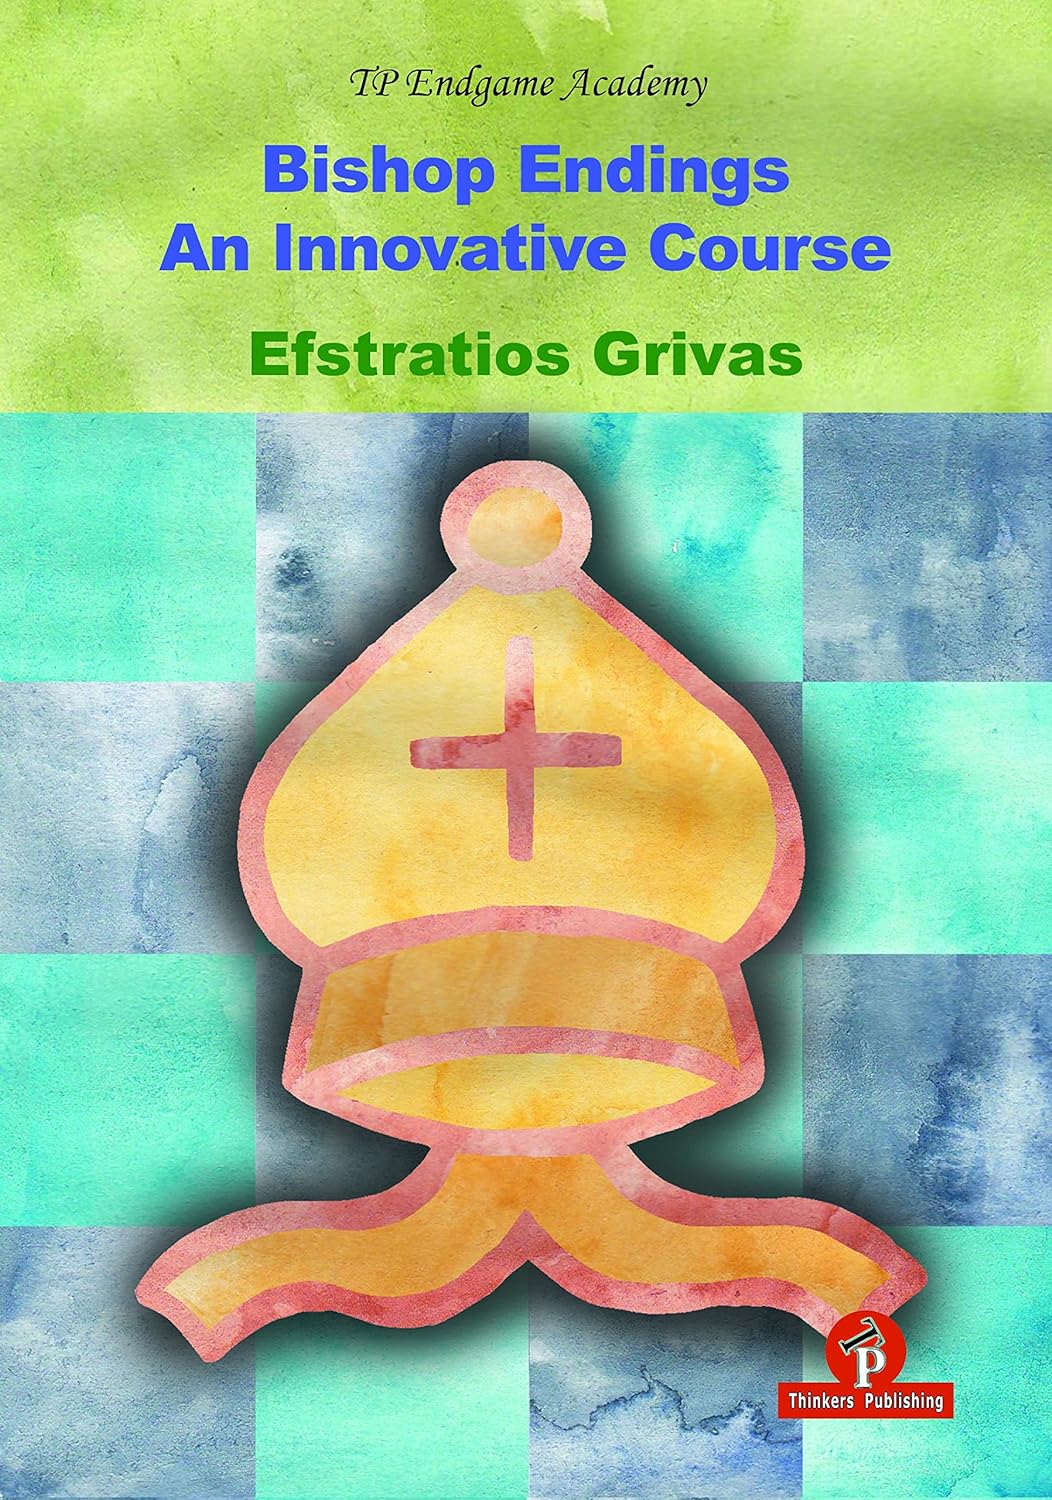 Bishop Endings - an innovative course